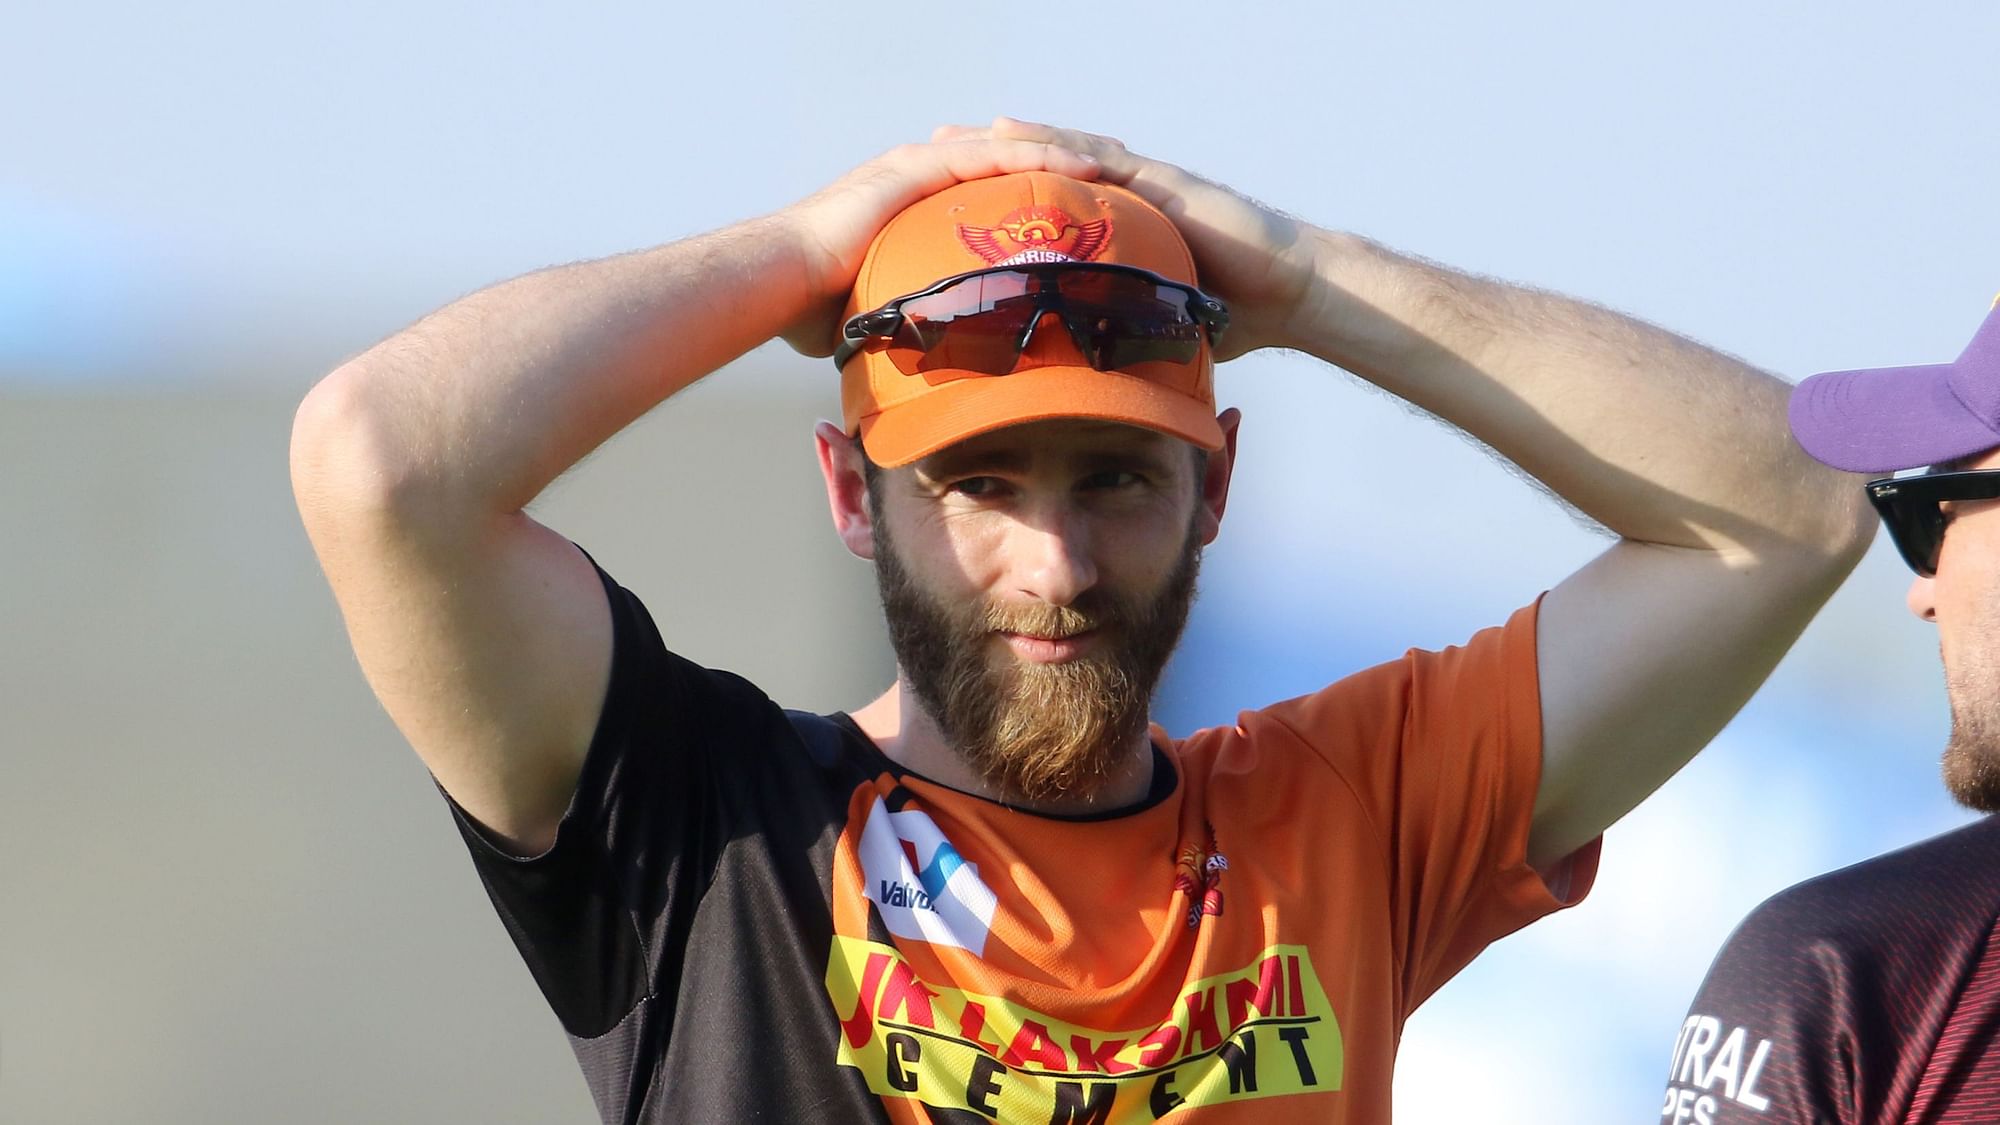 Kane Williamson says he is available to play for Sunrisers and fans want him in the playing XI.